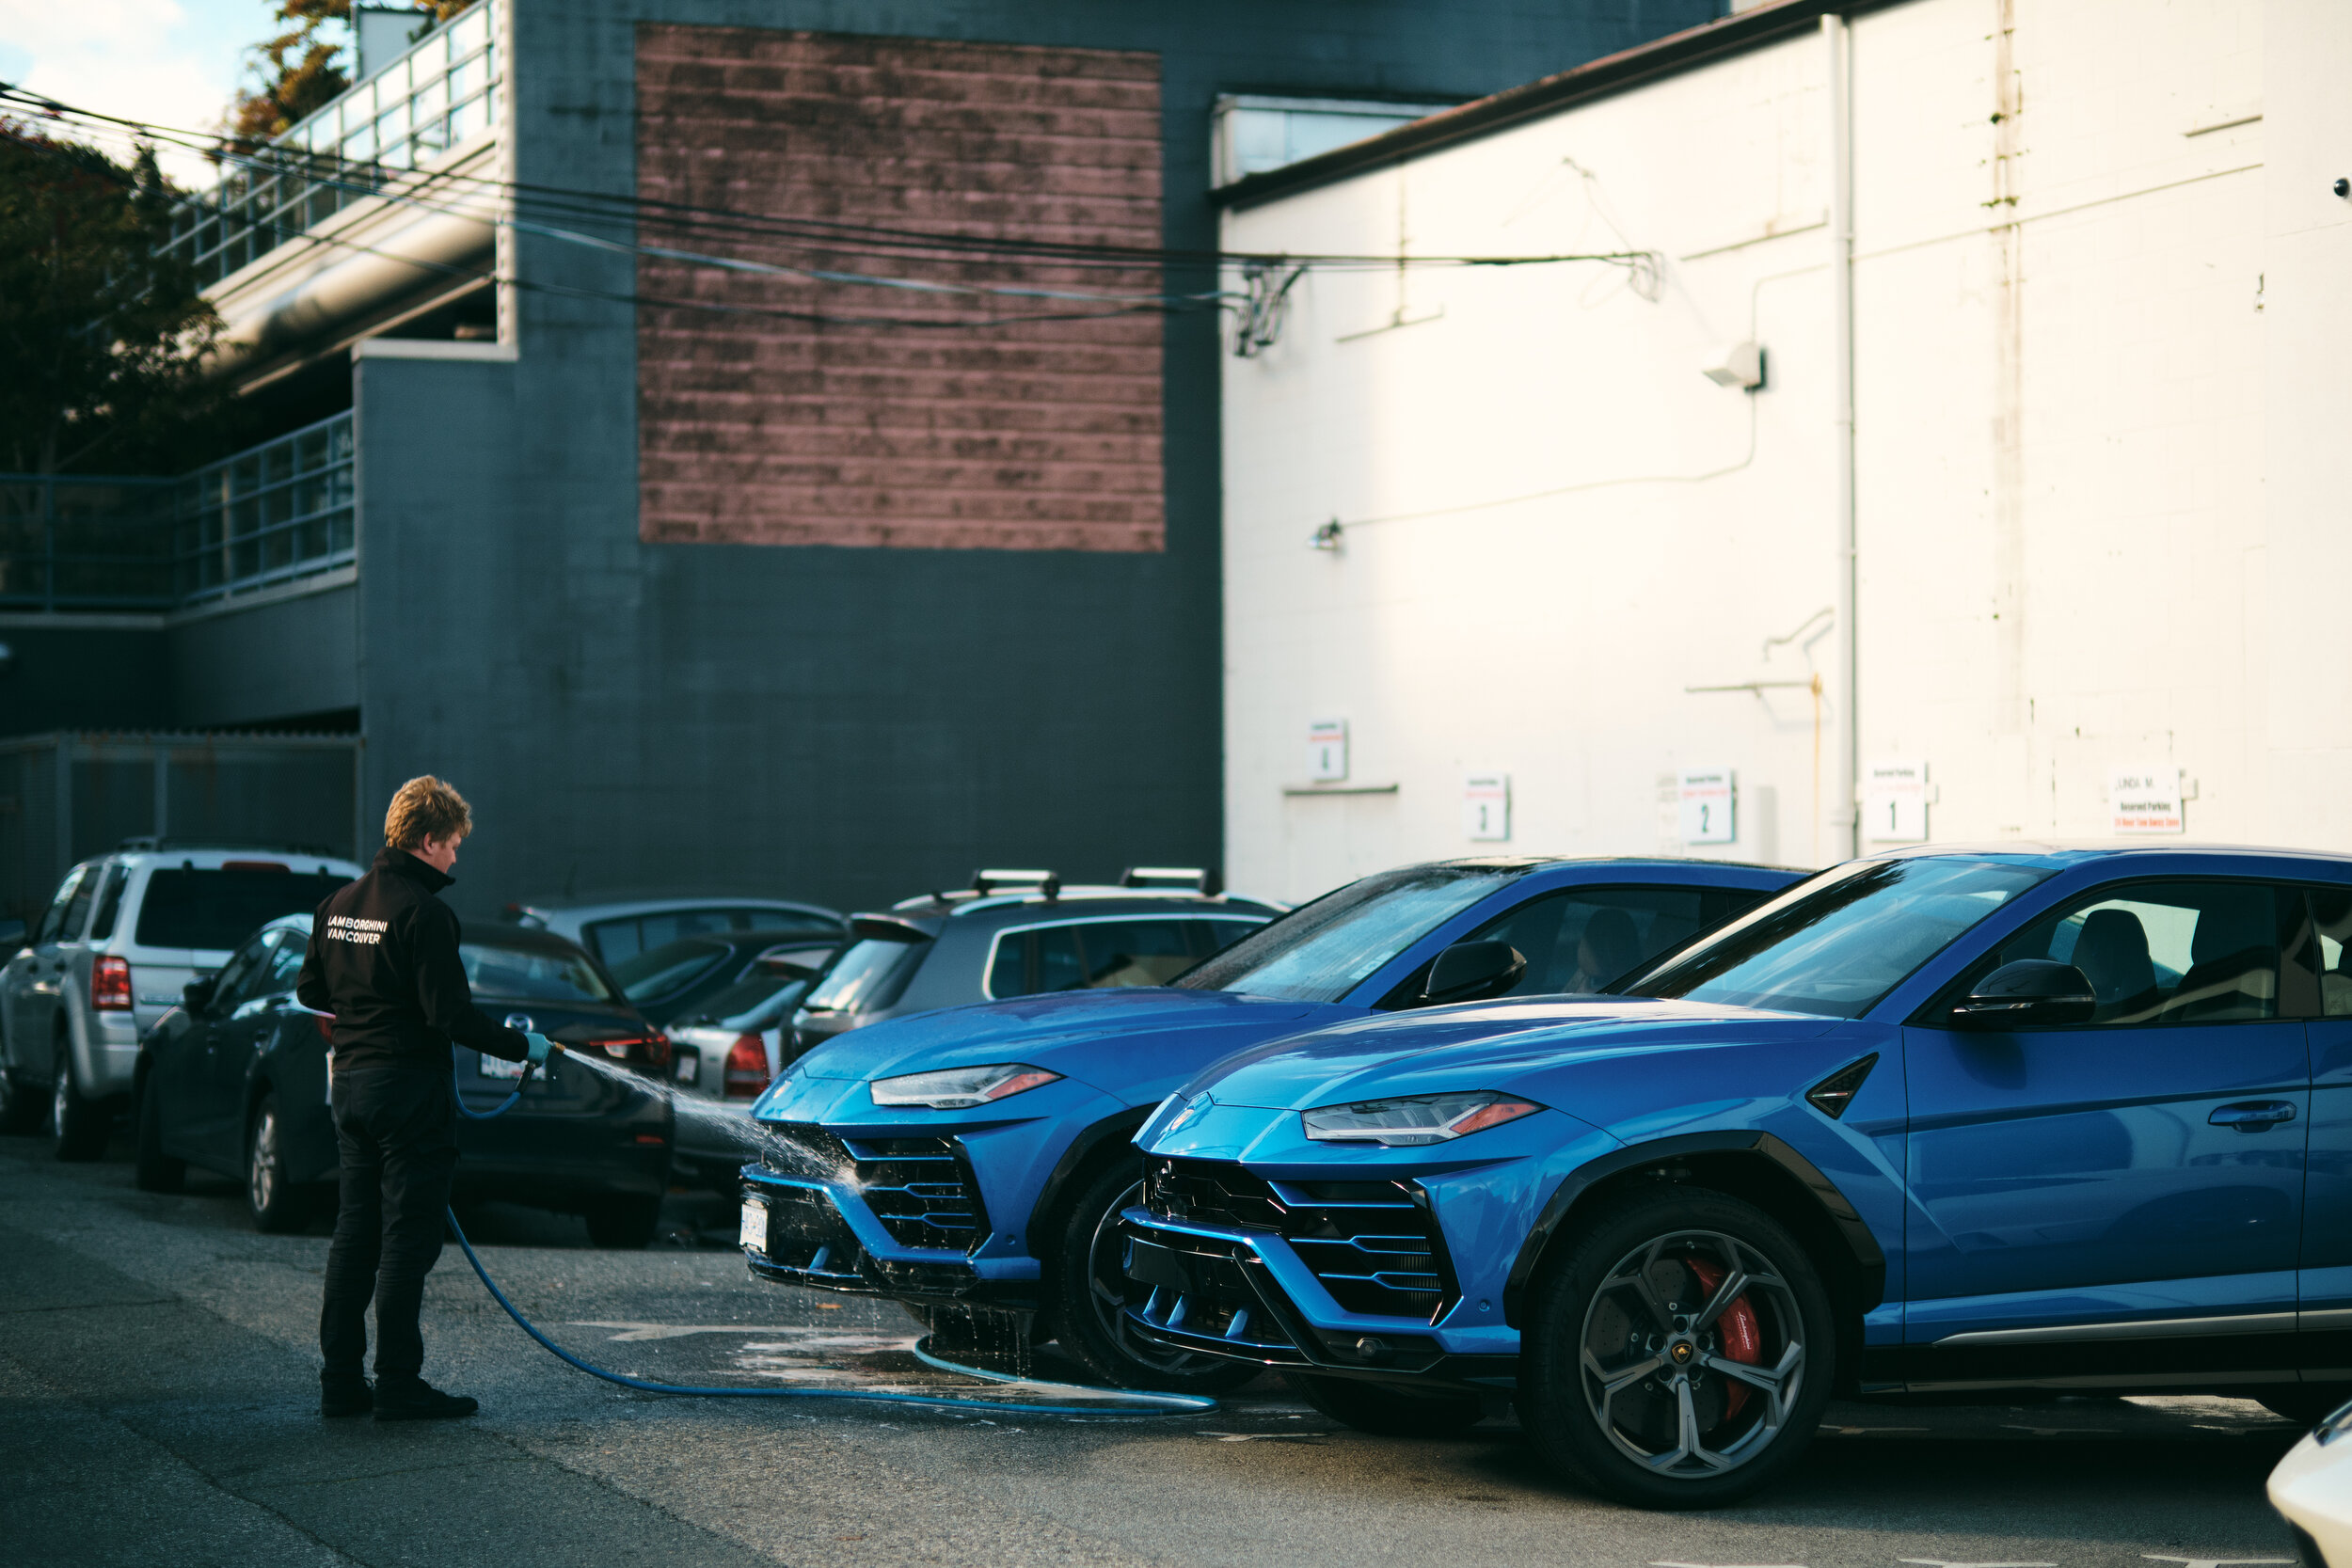 A young man washes two blue Lamborghini Urus SUVs in Vancouver. Sample image from a Fujifilm XF 50mm f/1 R WR